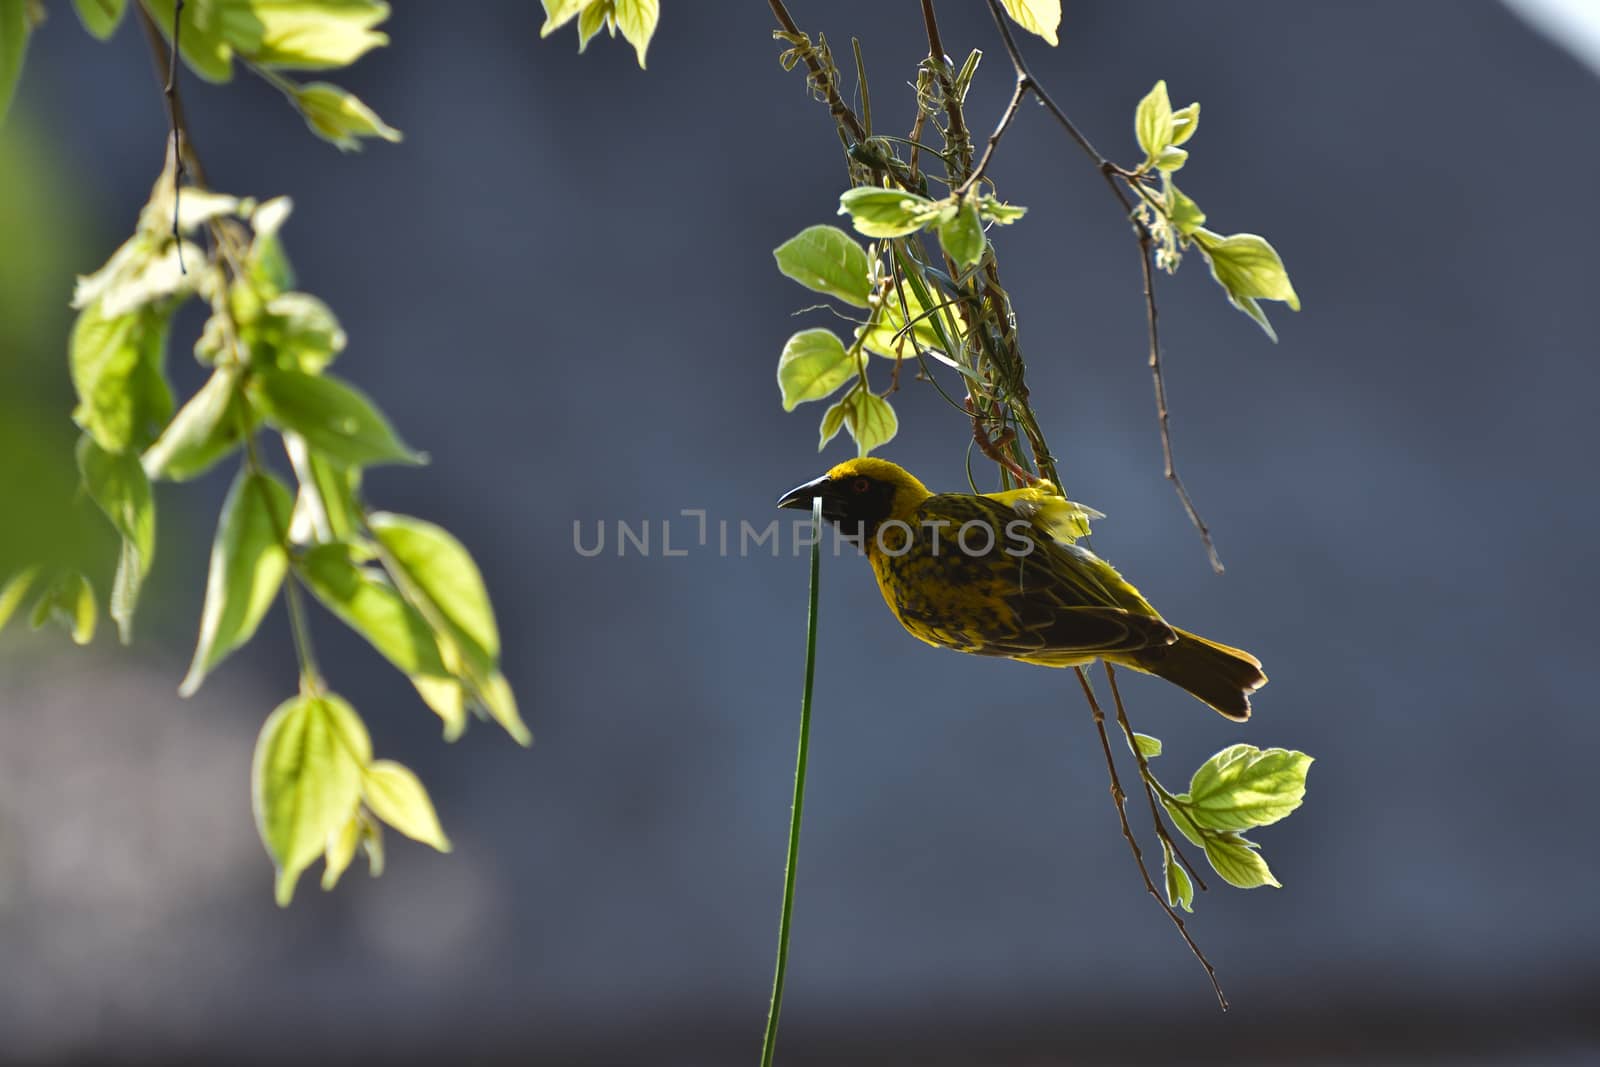 Yellow southern masked weaver bird (Ploceus velatus) in tree with leaf strip, Pretoria, South Africa